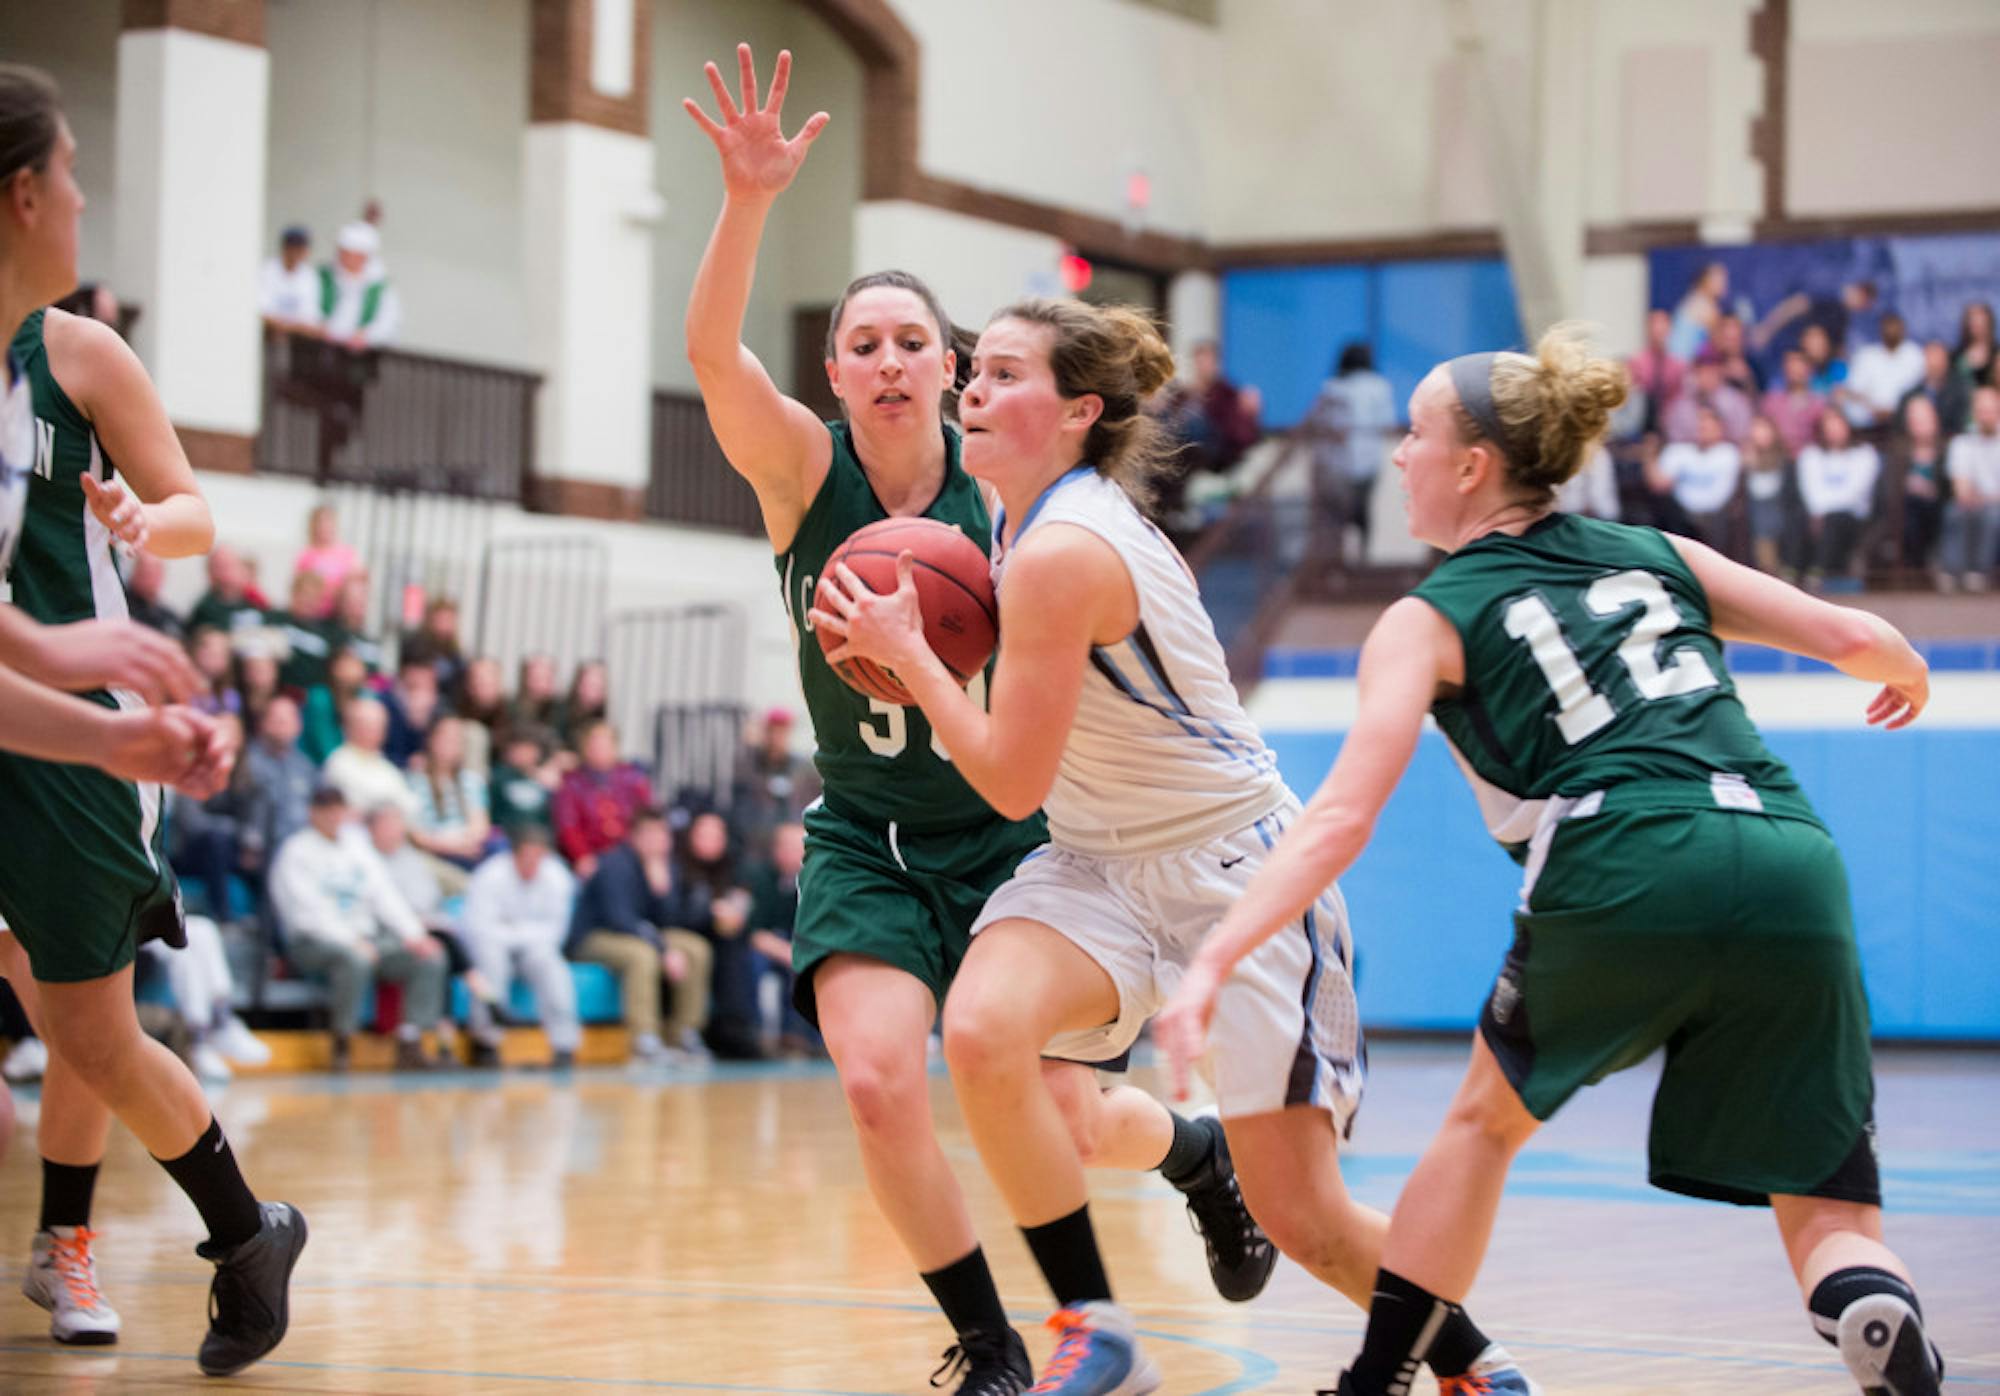 2014-03-14-Womens-Basketball-NCAA-Championship-Sections-against-Castleton-83